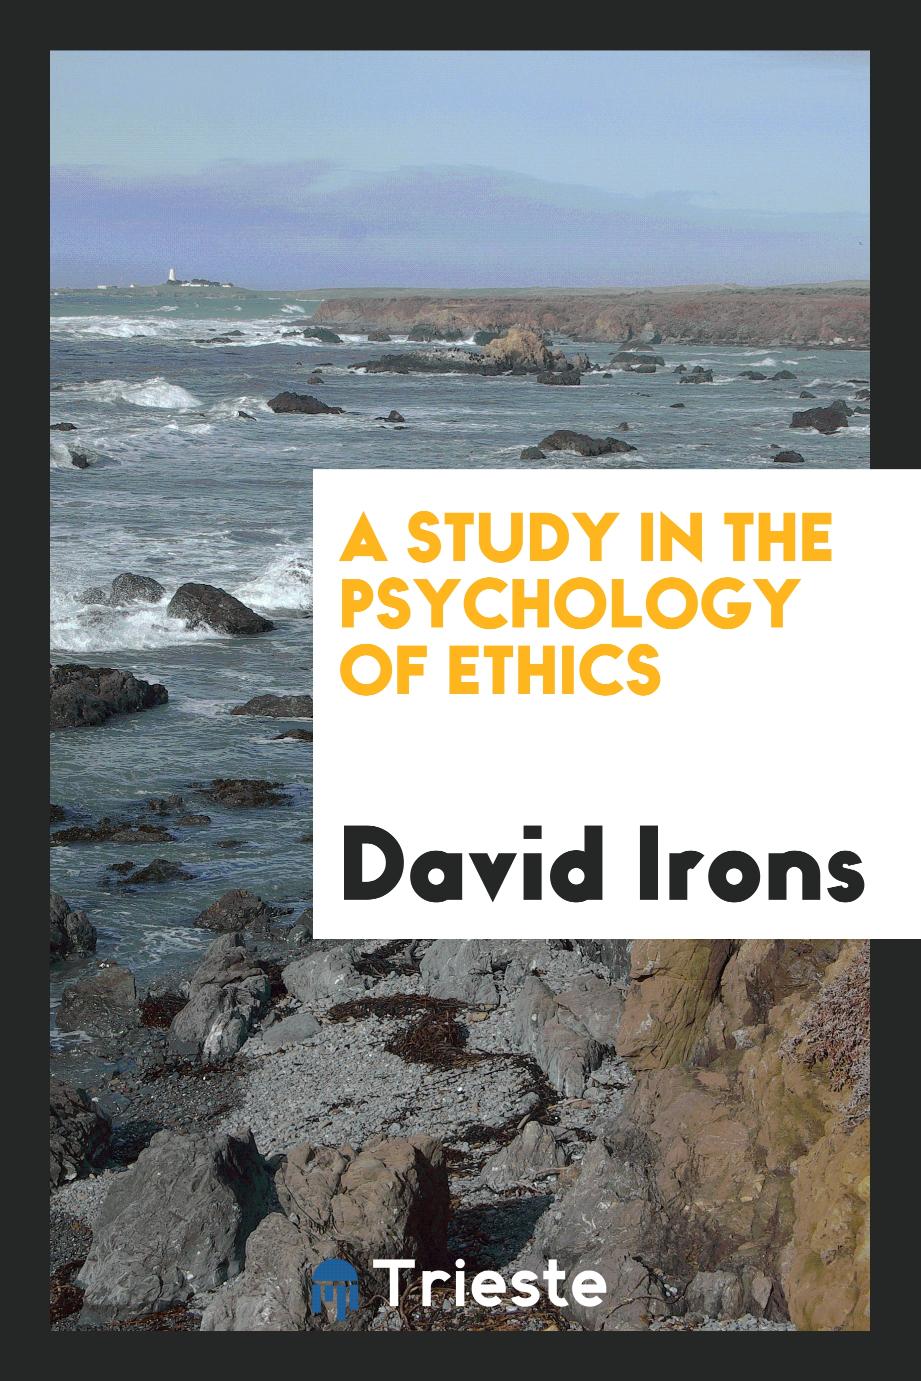 A study in the psychology of ethics